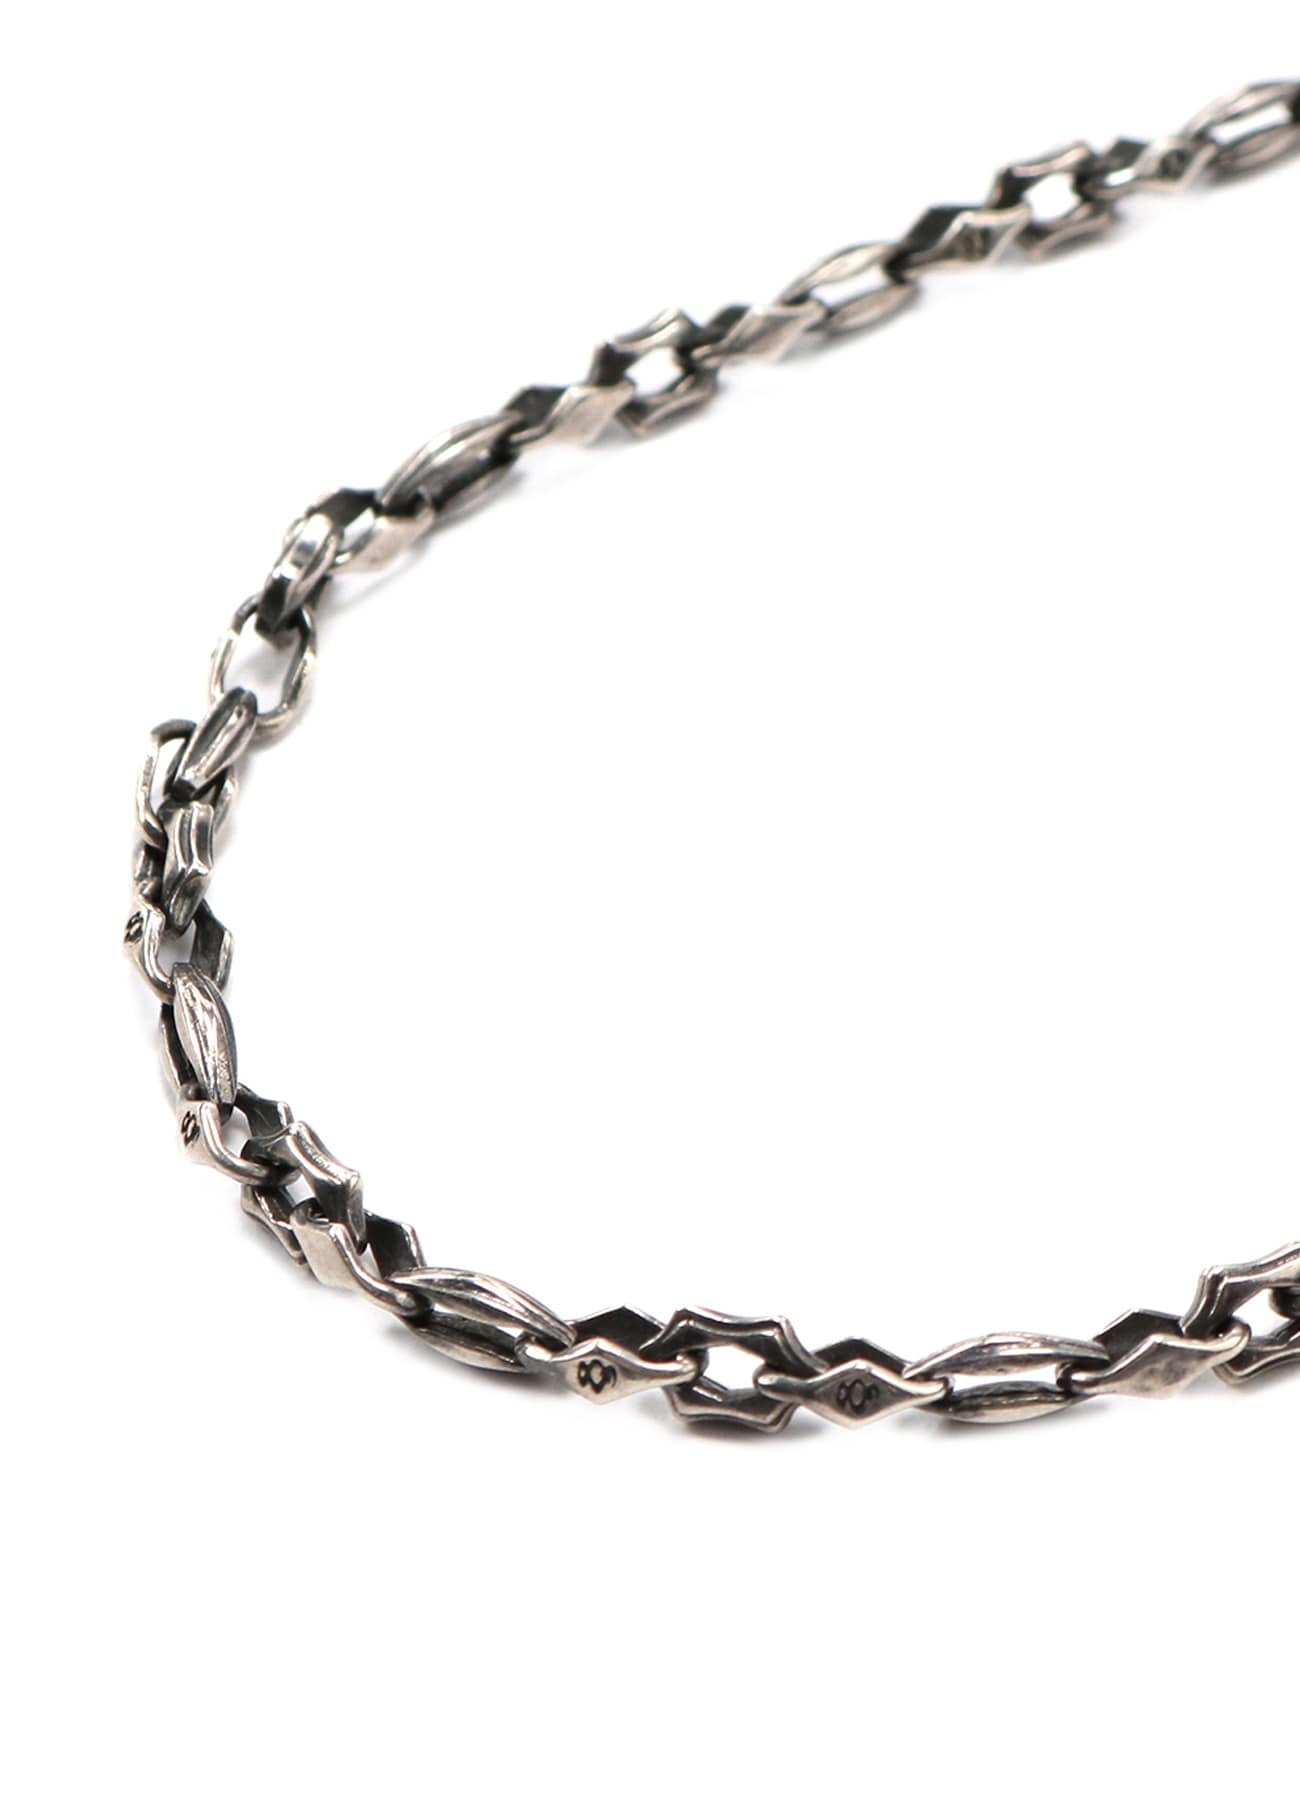 SILVER 950 GOTHIC CHAIN NECKLACE 45CM